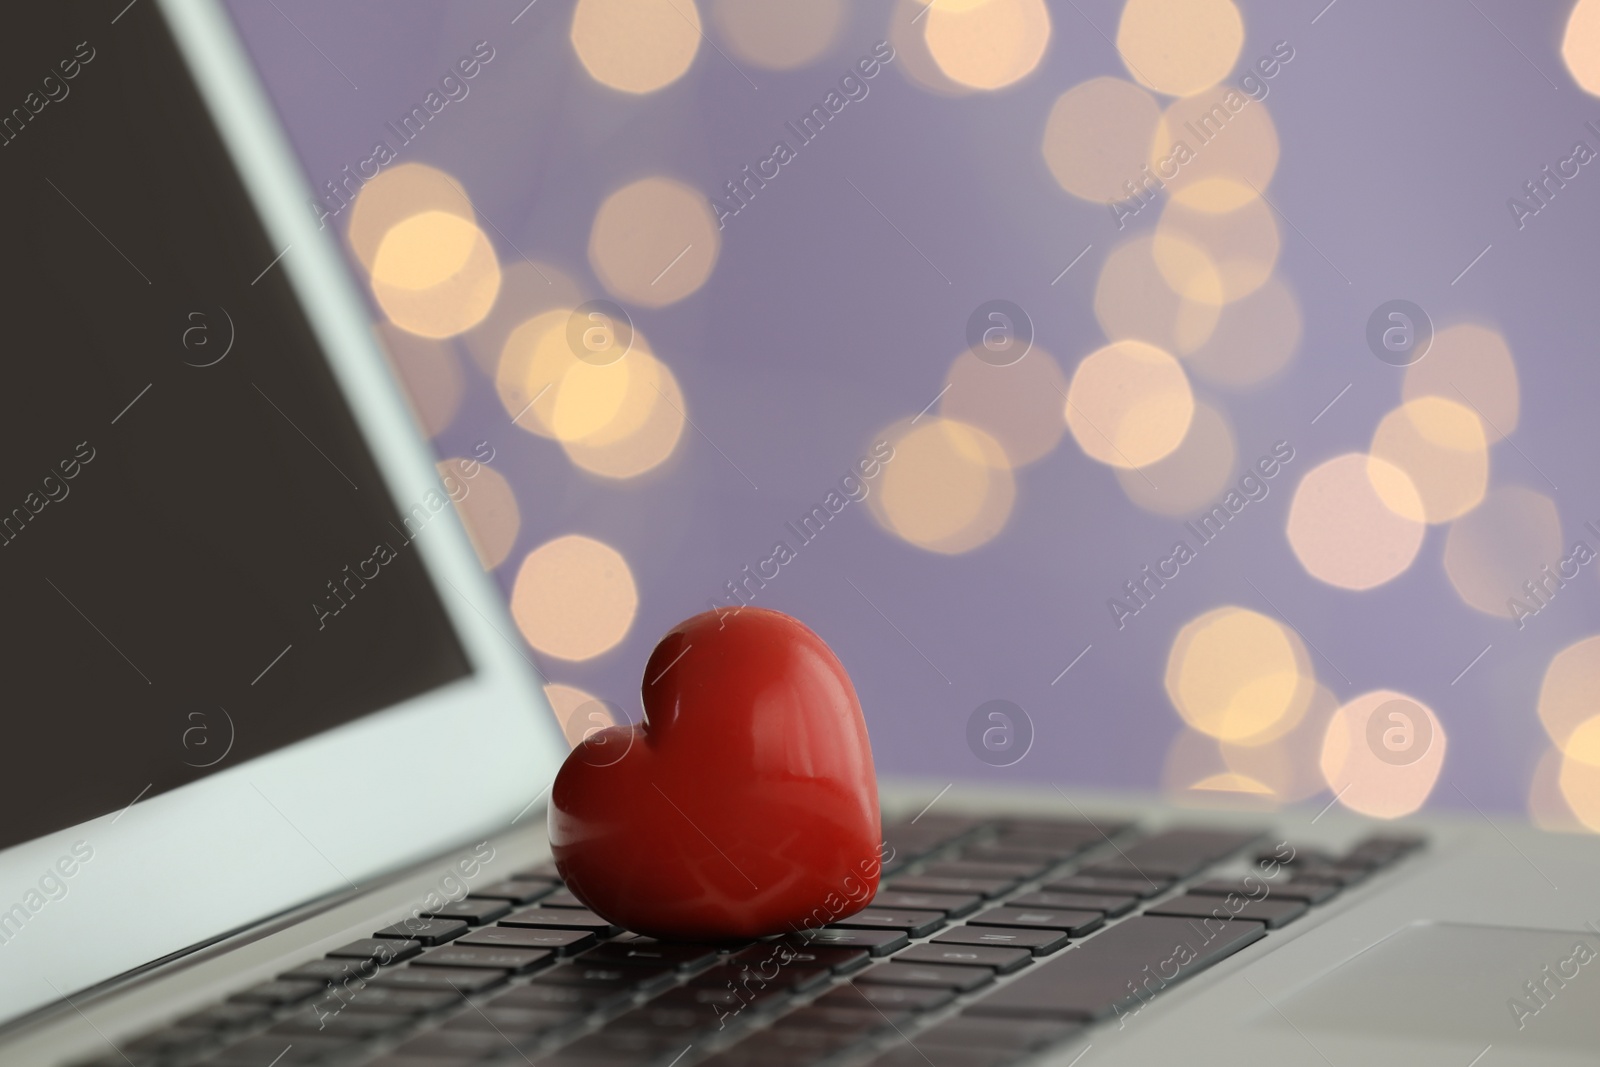 Photo of Red decorative heart on laptop, closeup view. Online dating